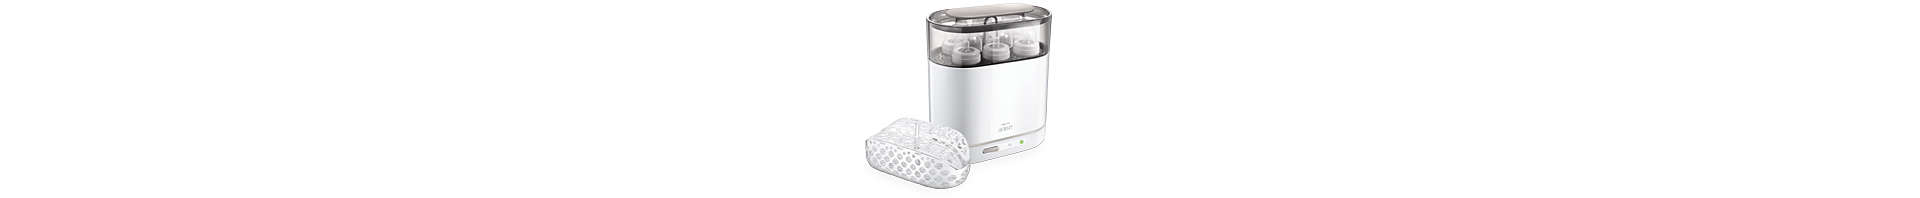 BOUGHT - Philips Avent 4-in-1 Electric Steam Steriliser